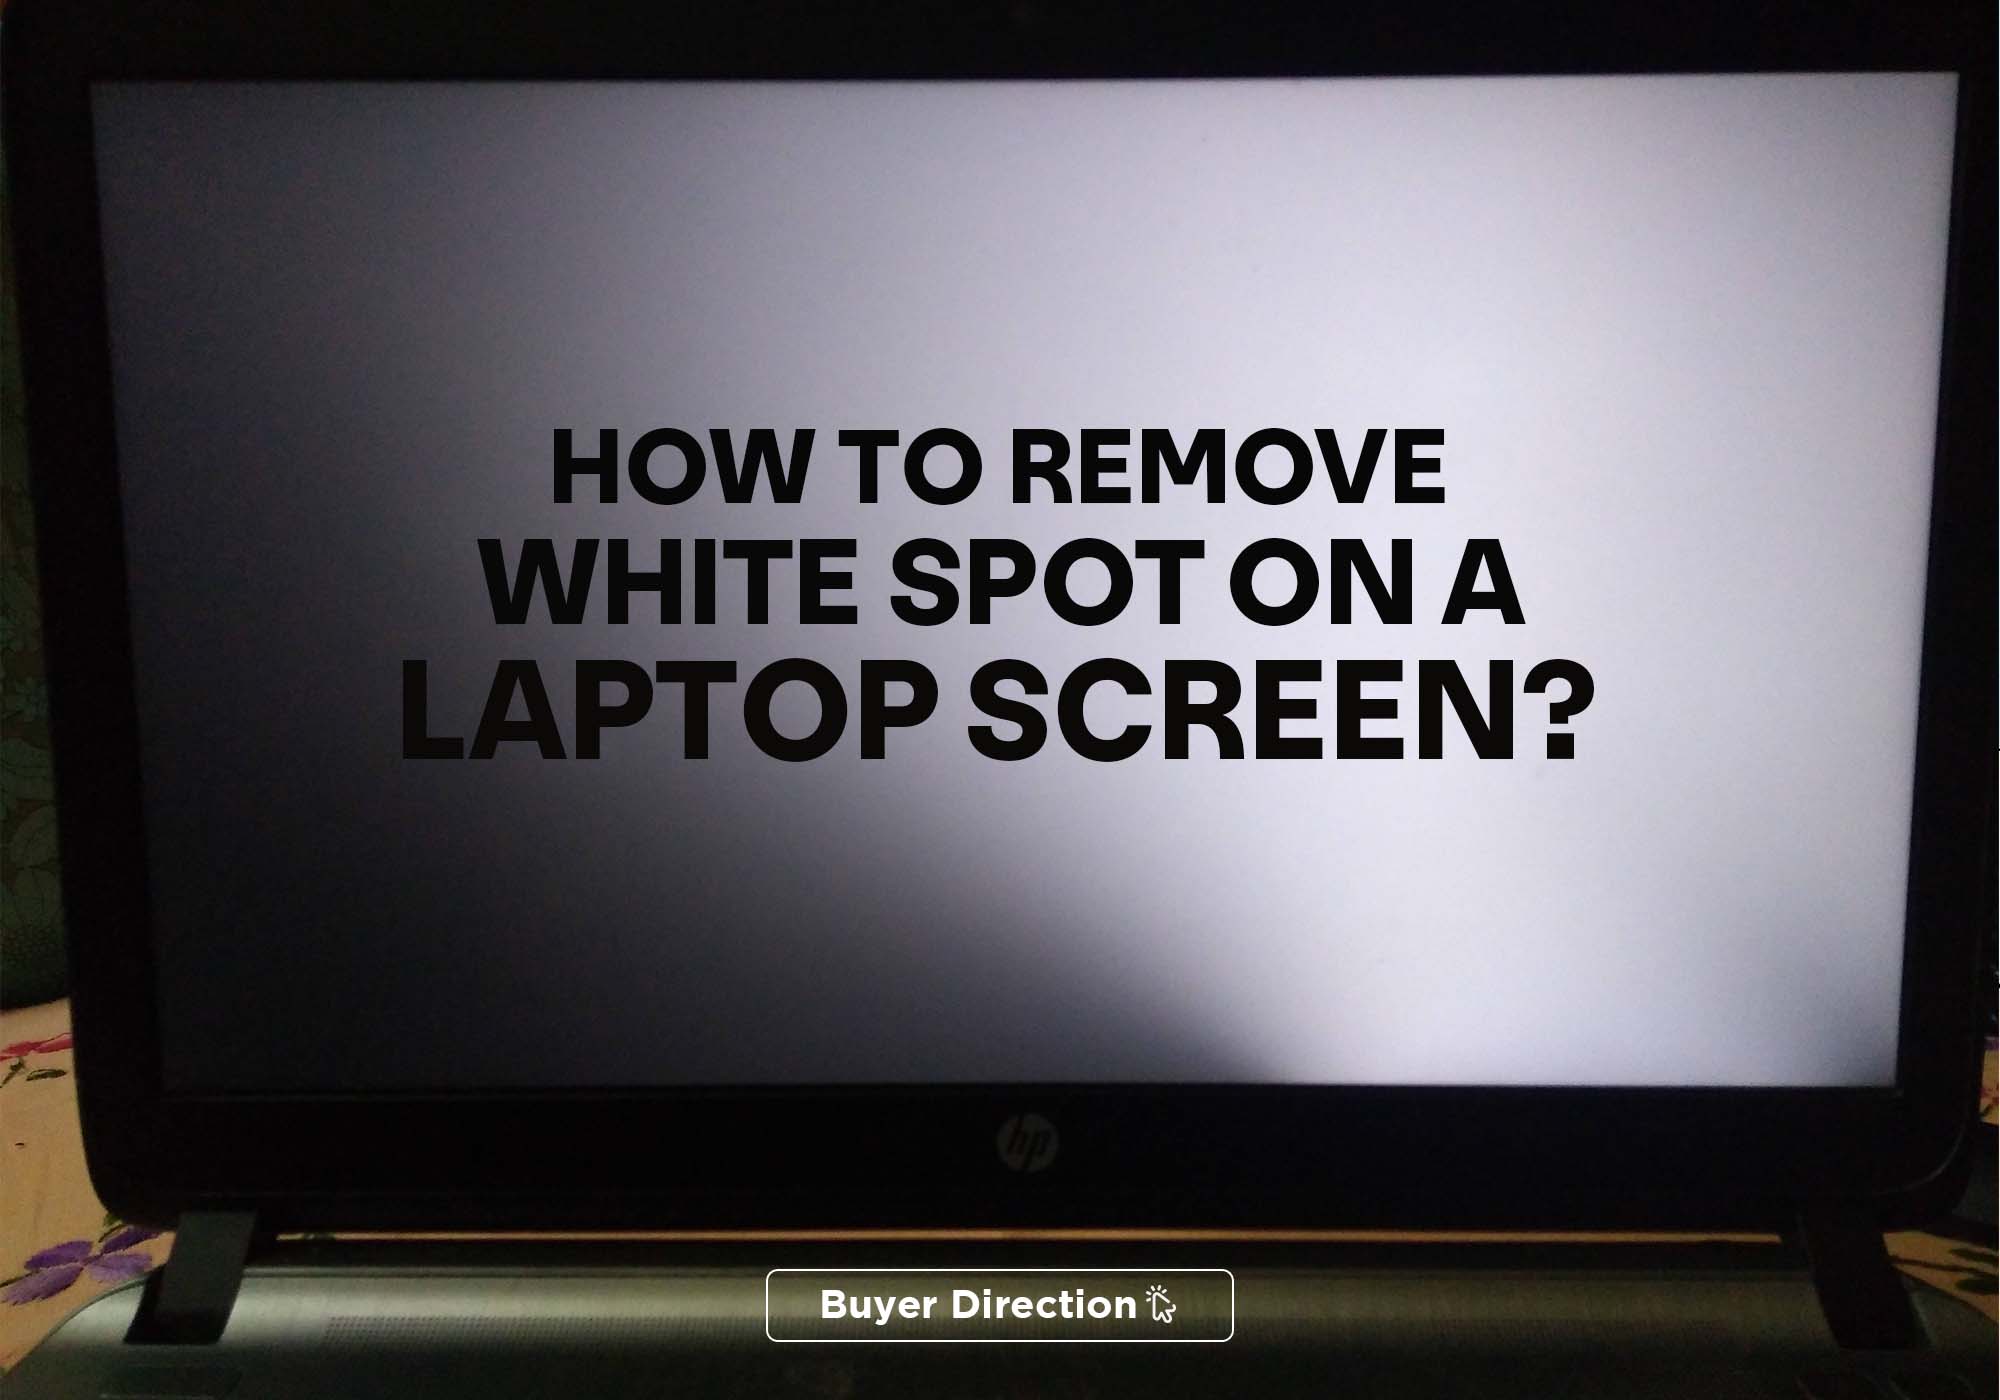 How To Remove White Spot On A Laptop Screen?